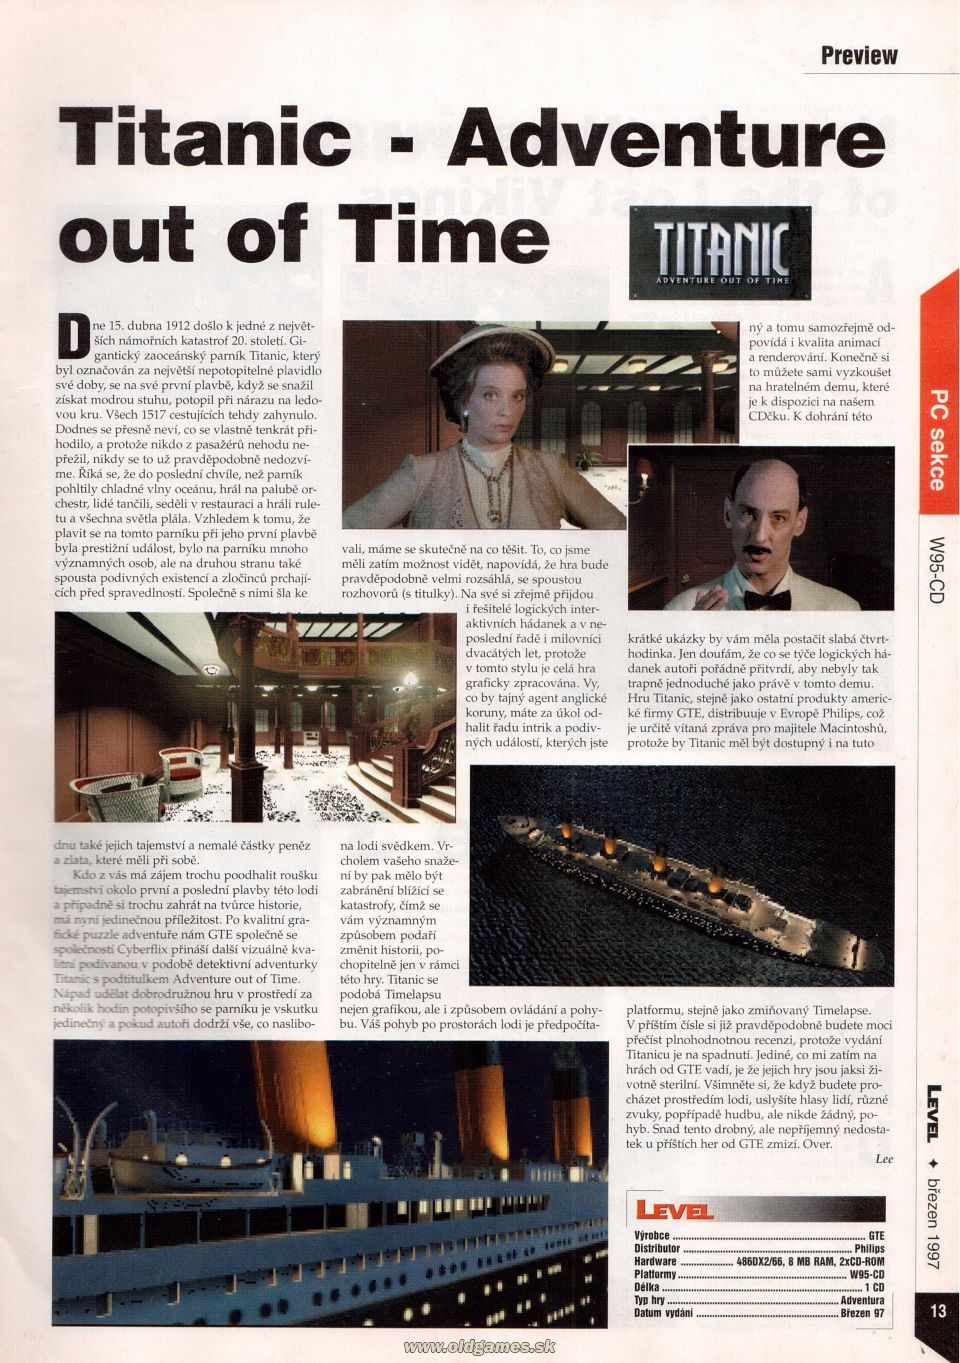 Preview: Titanic - Adventure out of Time